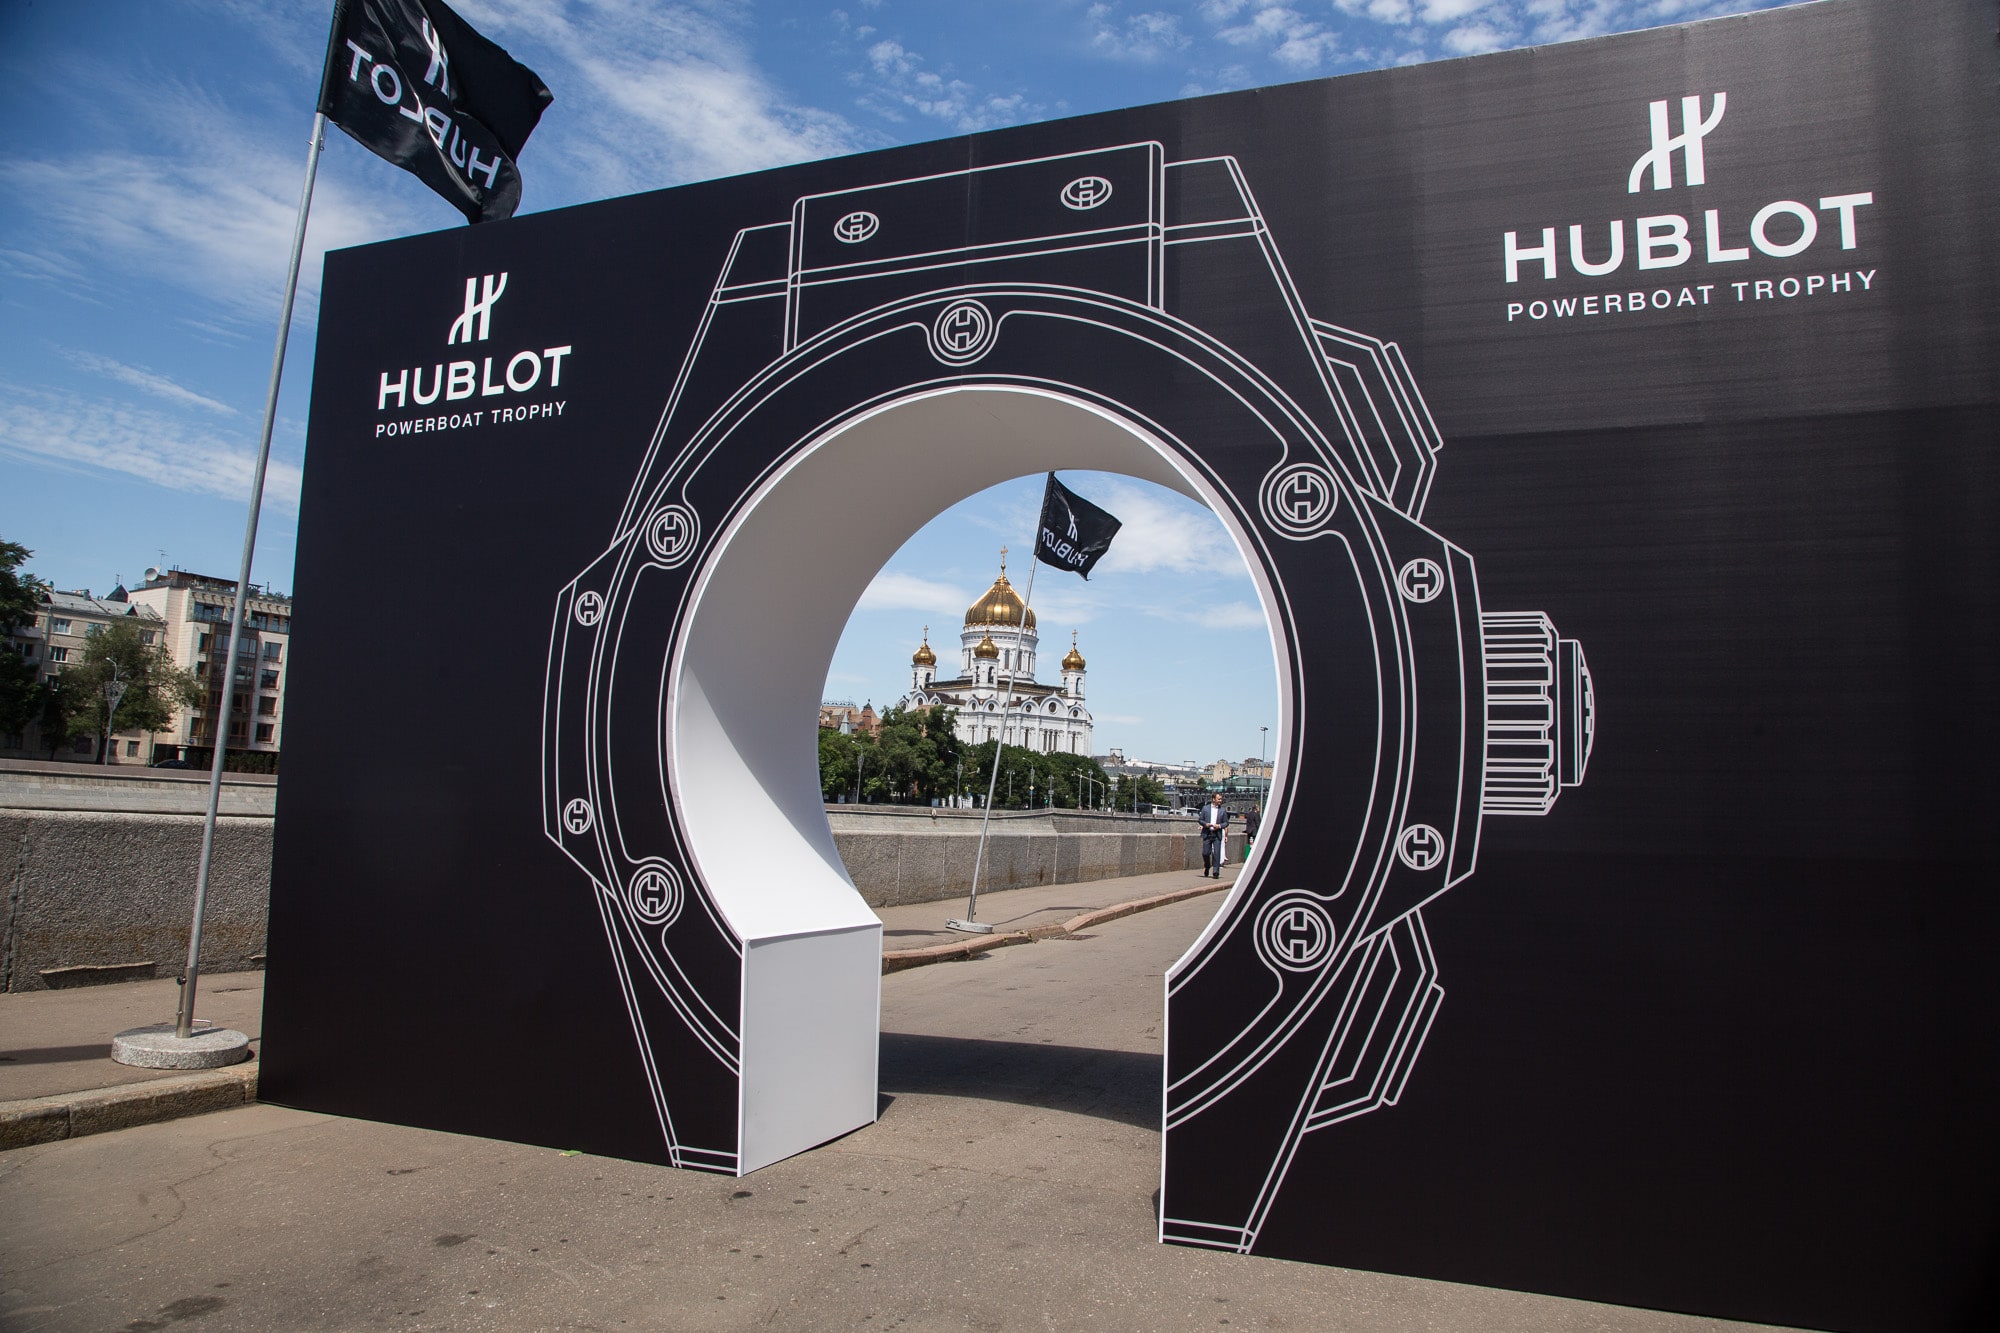 Hublot powerboat 2015 Moscow